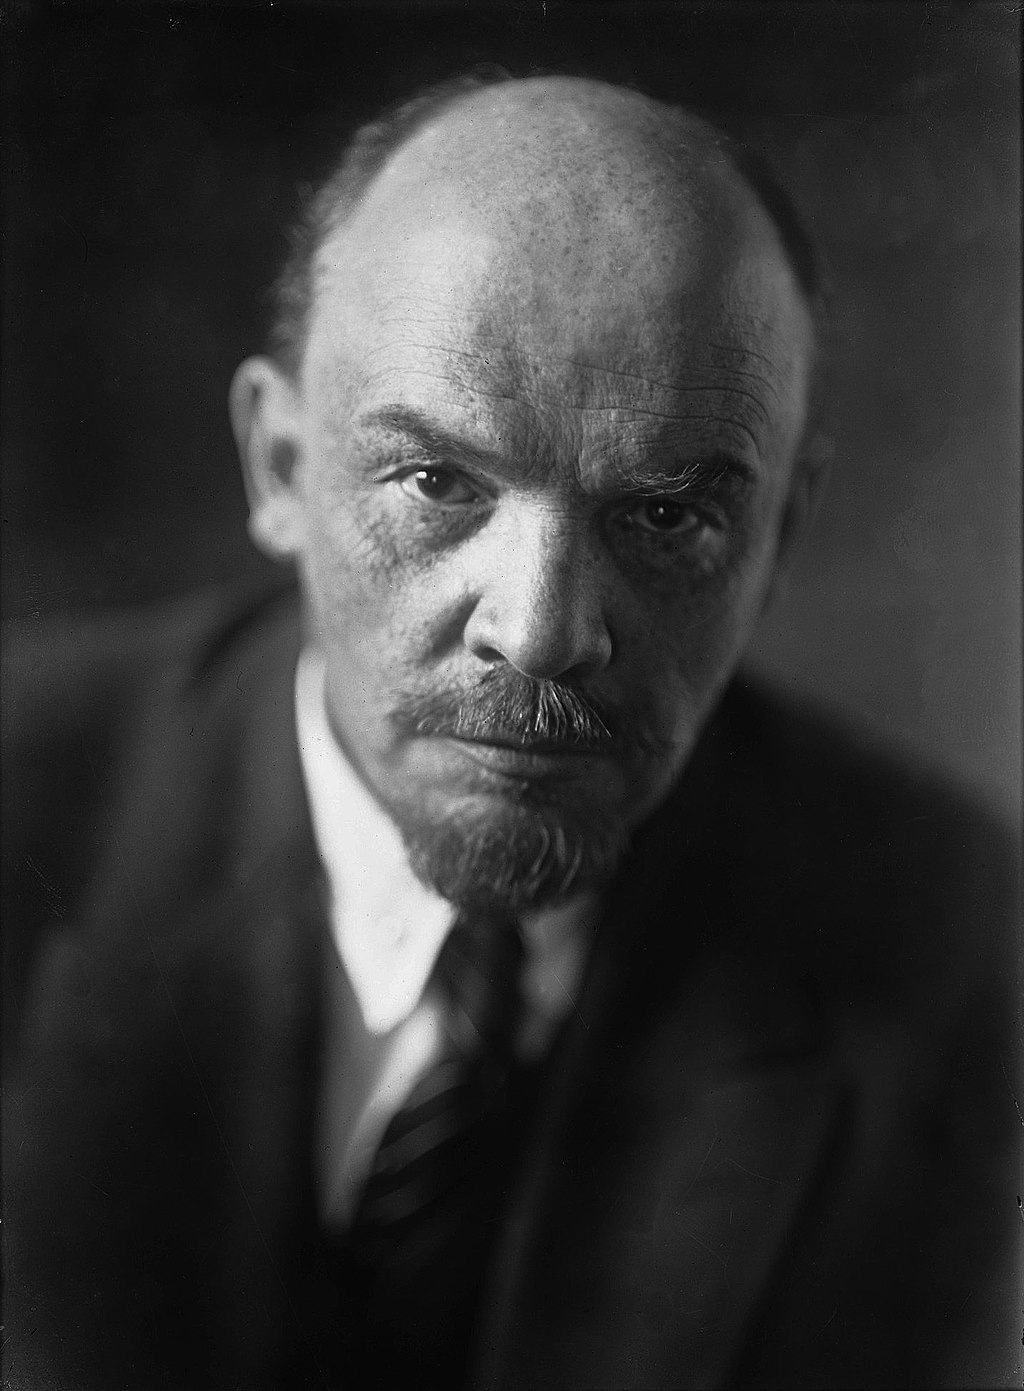 Who was Vladimir Lenin and what were his contributions to the Soviet Union